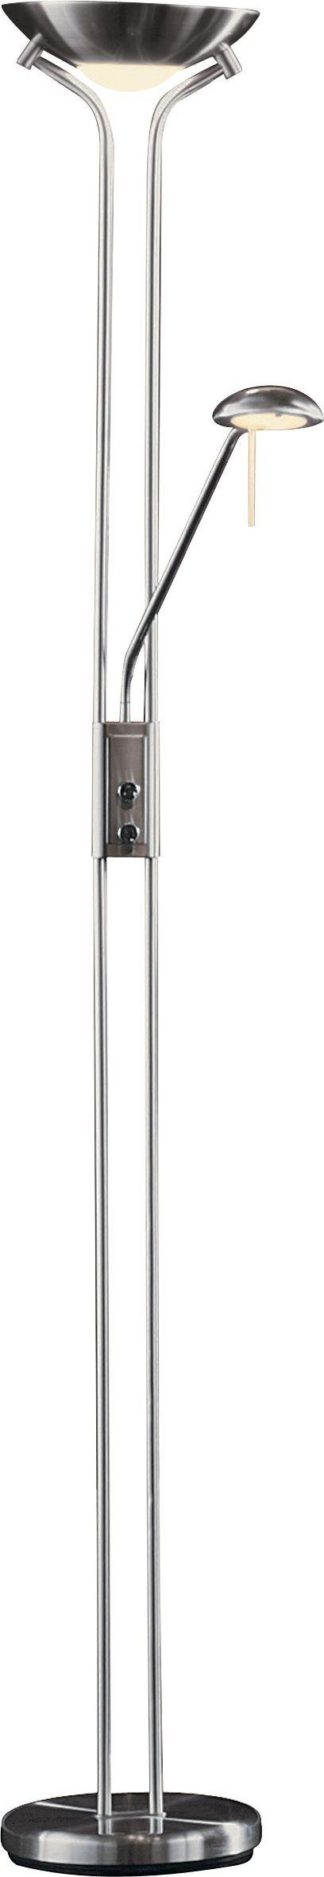 An Image of Argos Home Father & Child Uplighter Floor Lamp - Chrome